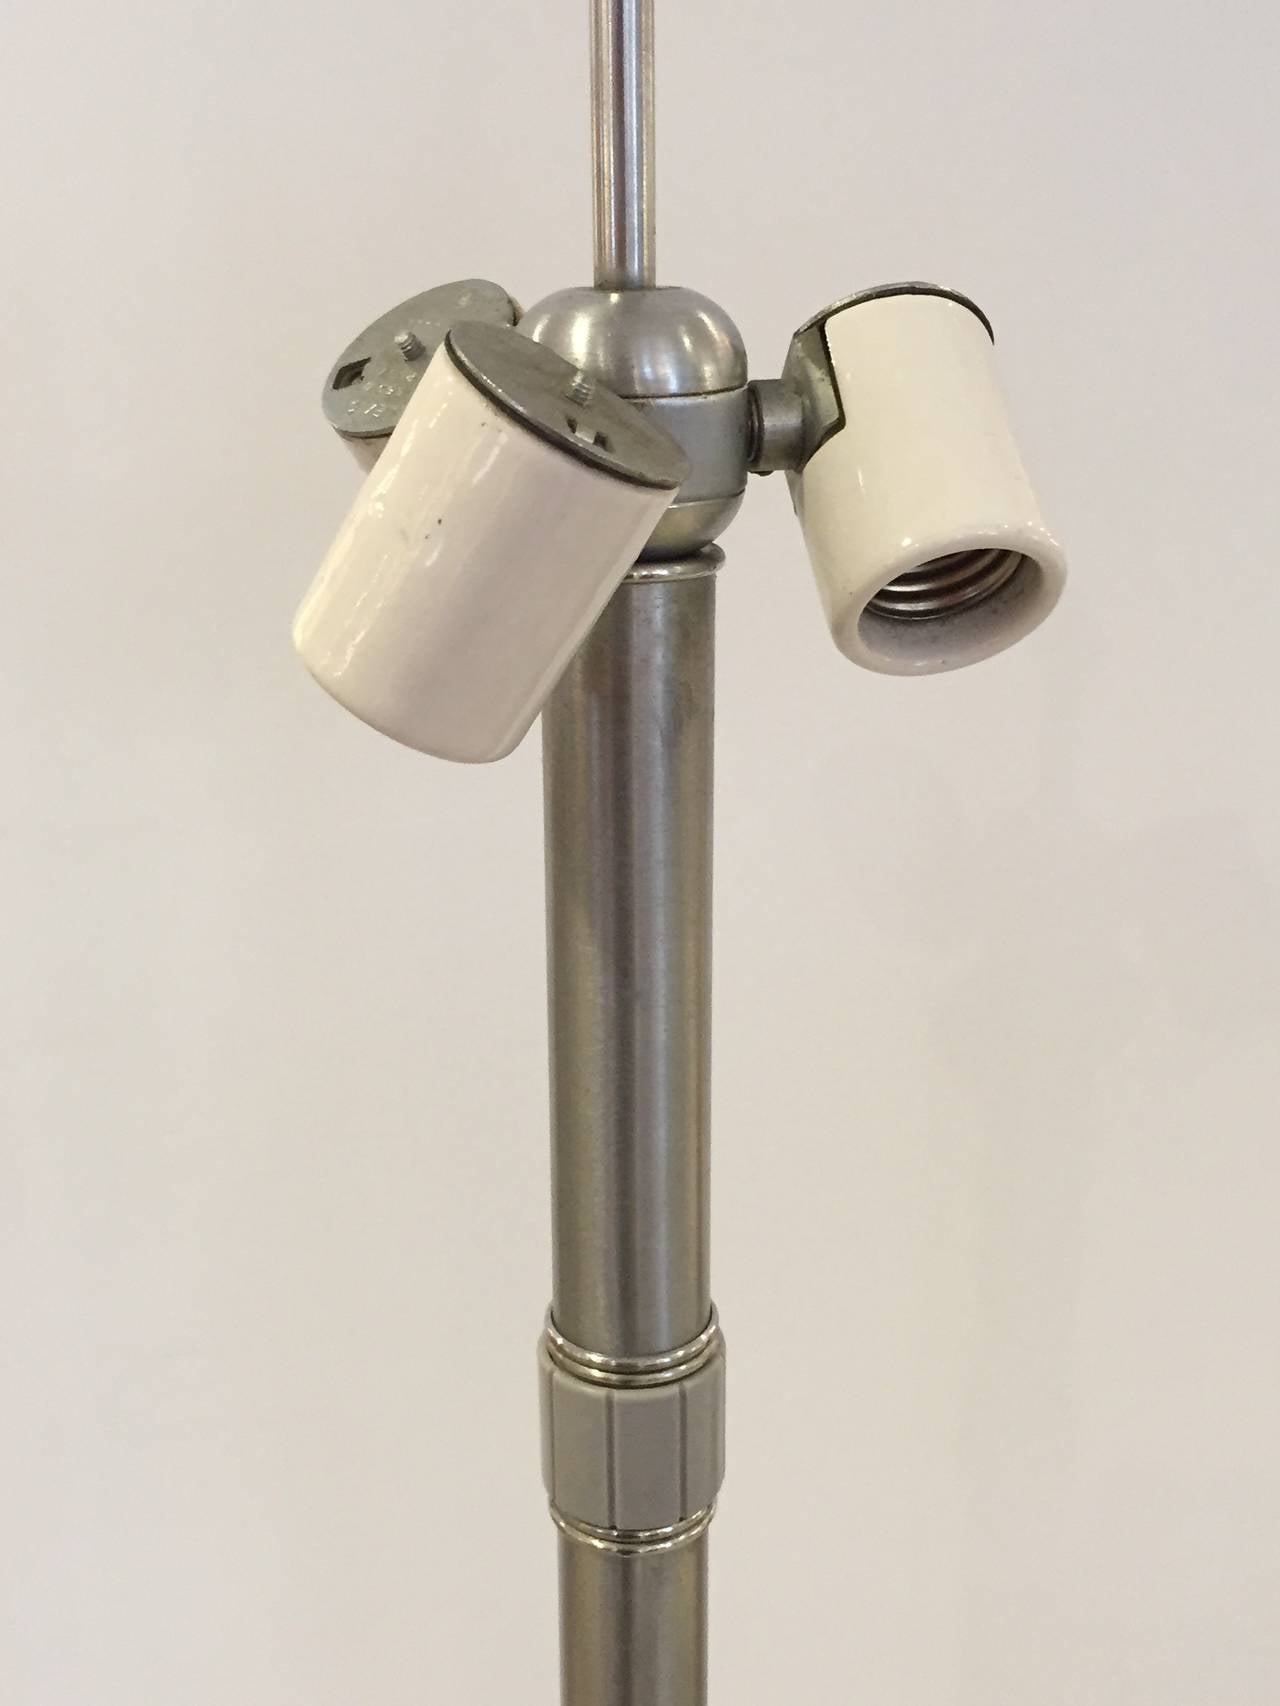 Early, simple Machine Age design. Brushed nickel stem and base with rotating three-way switch. Stamped Hansen.